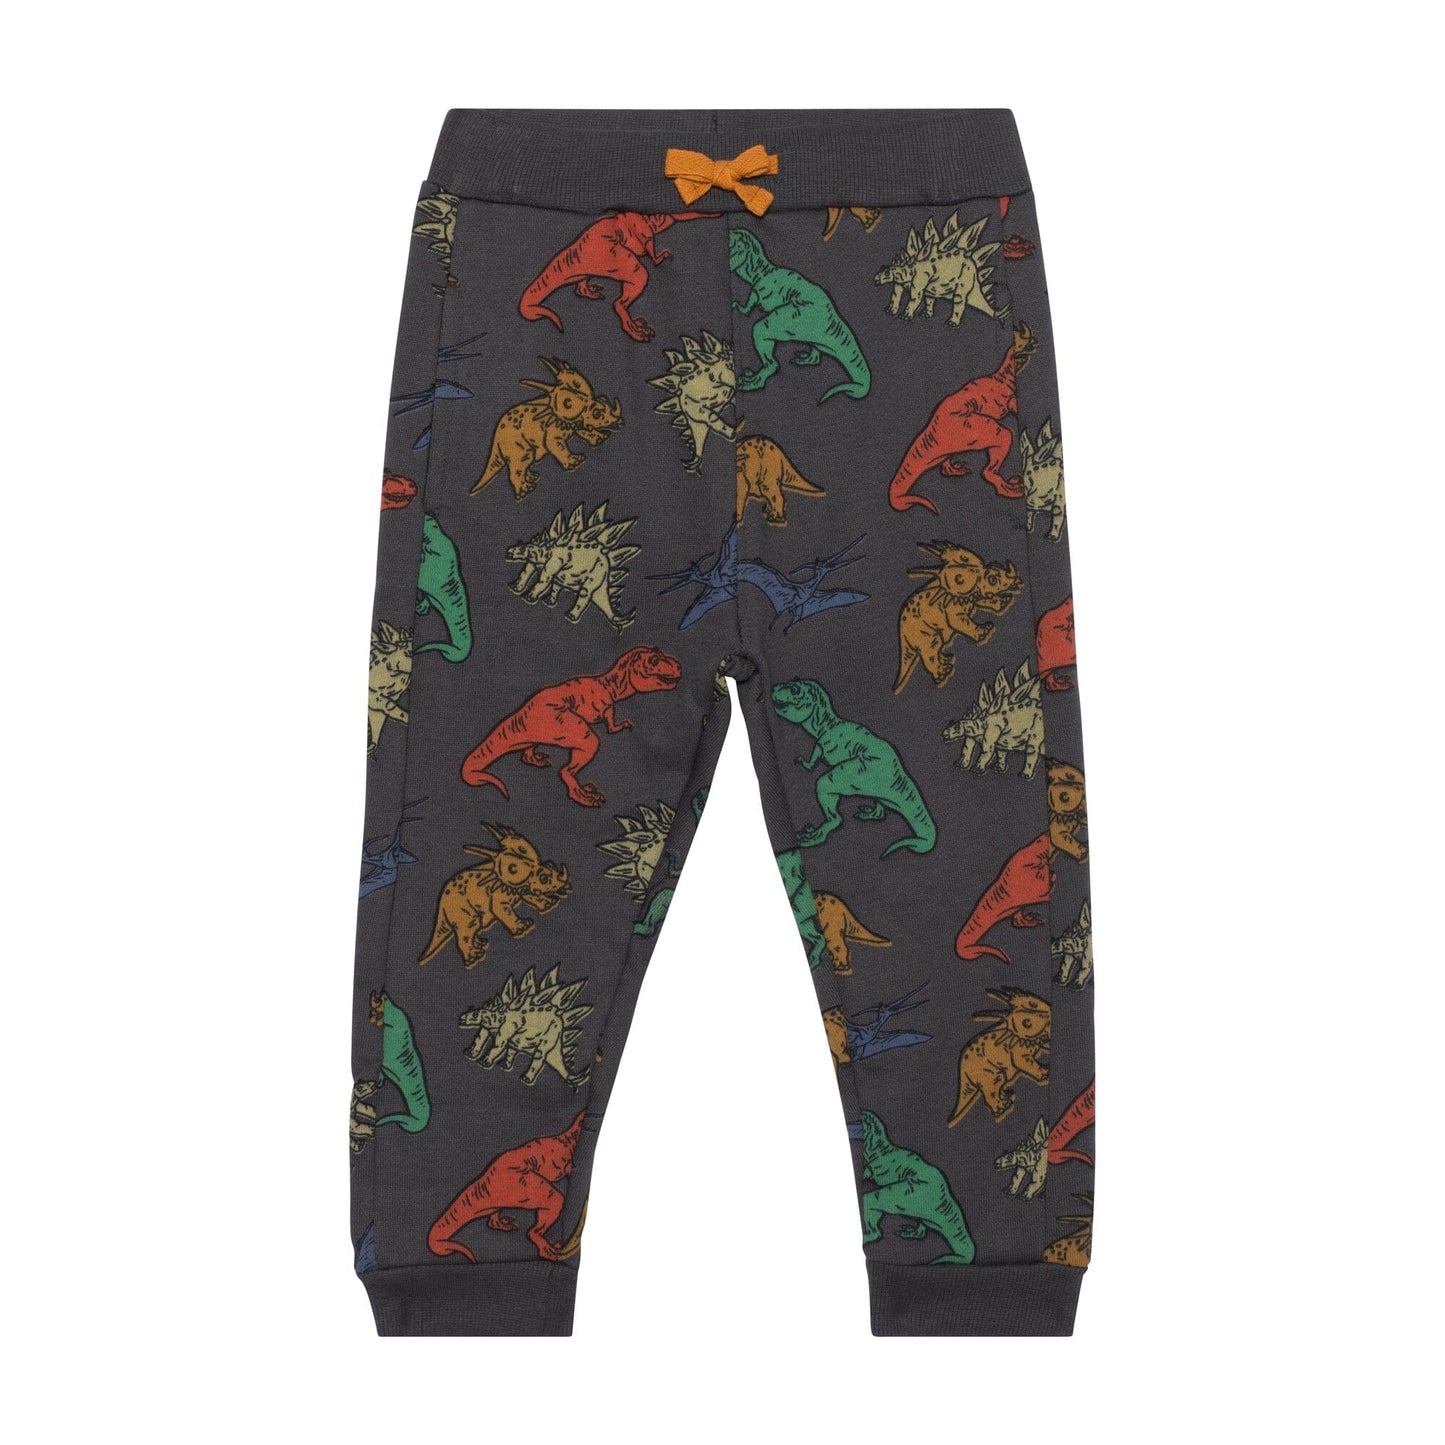 Printed French Terry Pant Charcoal Grey Multicolor Dinosaurs - E30S20_090